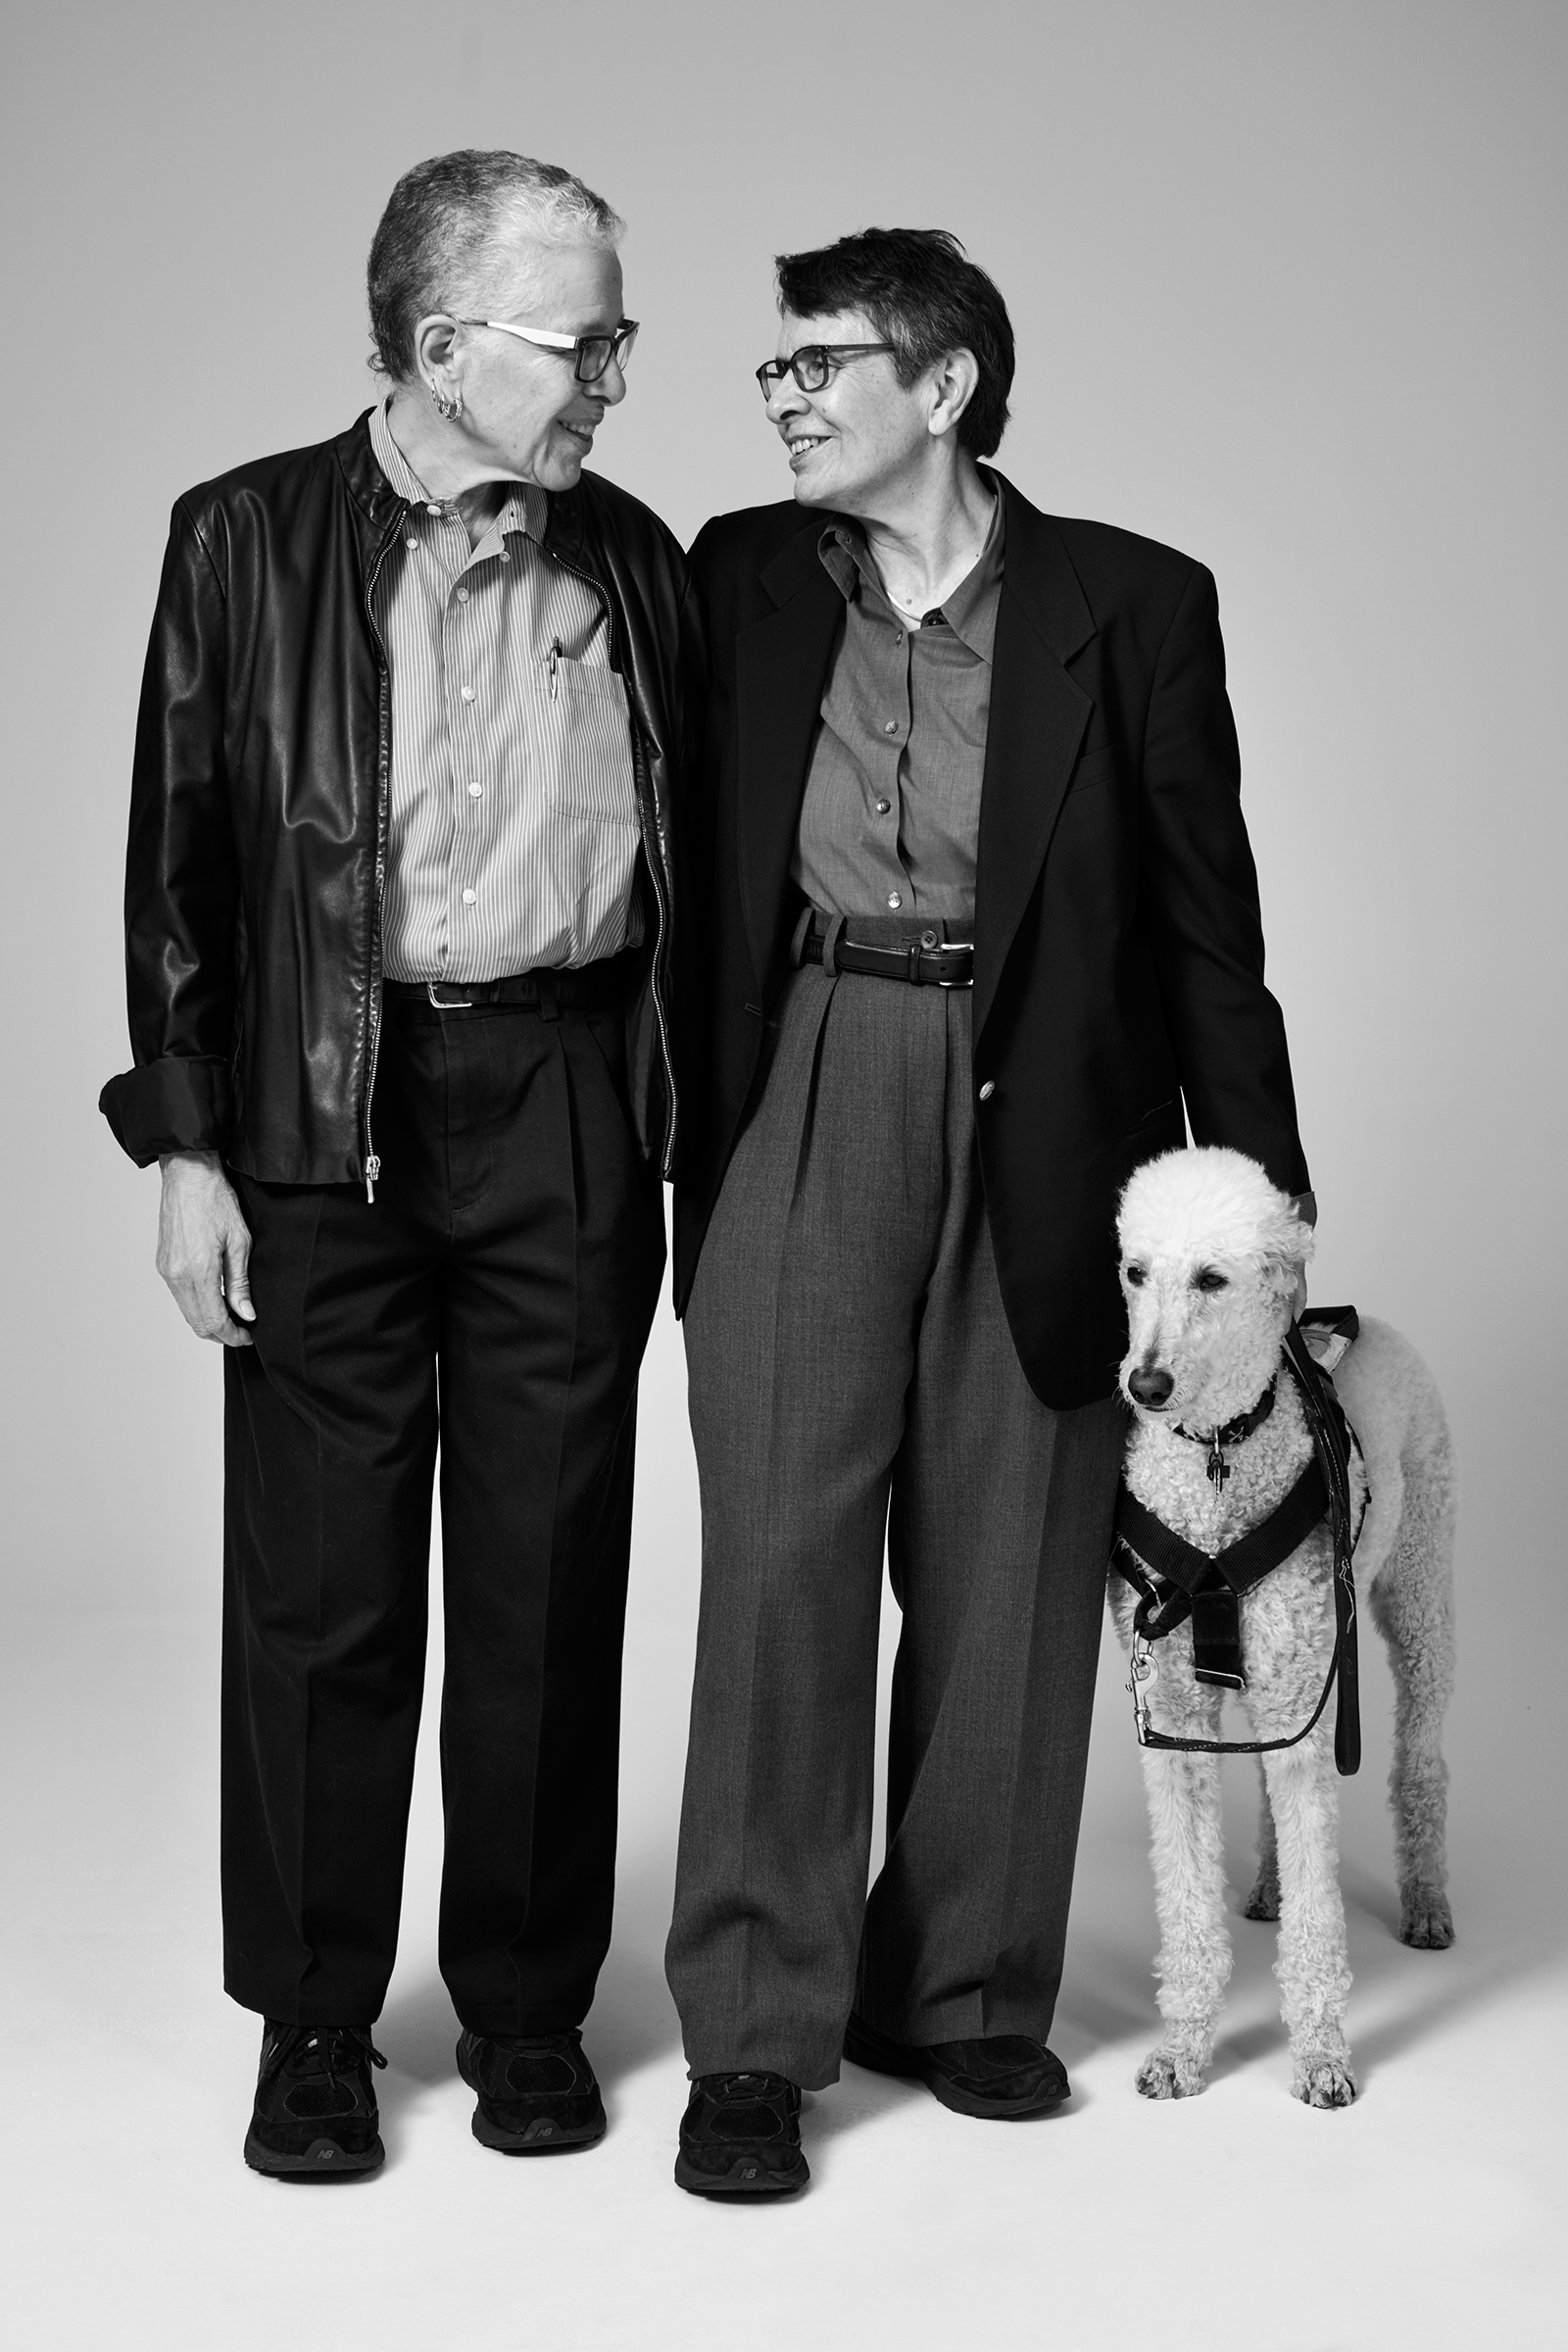 "Things are really coming full circle. We saw an evolution in the direction of corporatization; now we’re coming around to a more activist contemporary moment, toward a cry for seriousness and political activism as well as joy and celebration." — Karla Jay, a professor emerita at Pace University, between her spouse Karen F. Kerner and her guide dog Duchess. Jay was an early member of the Gay Liberation Front. (Collier Schorr)